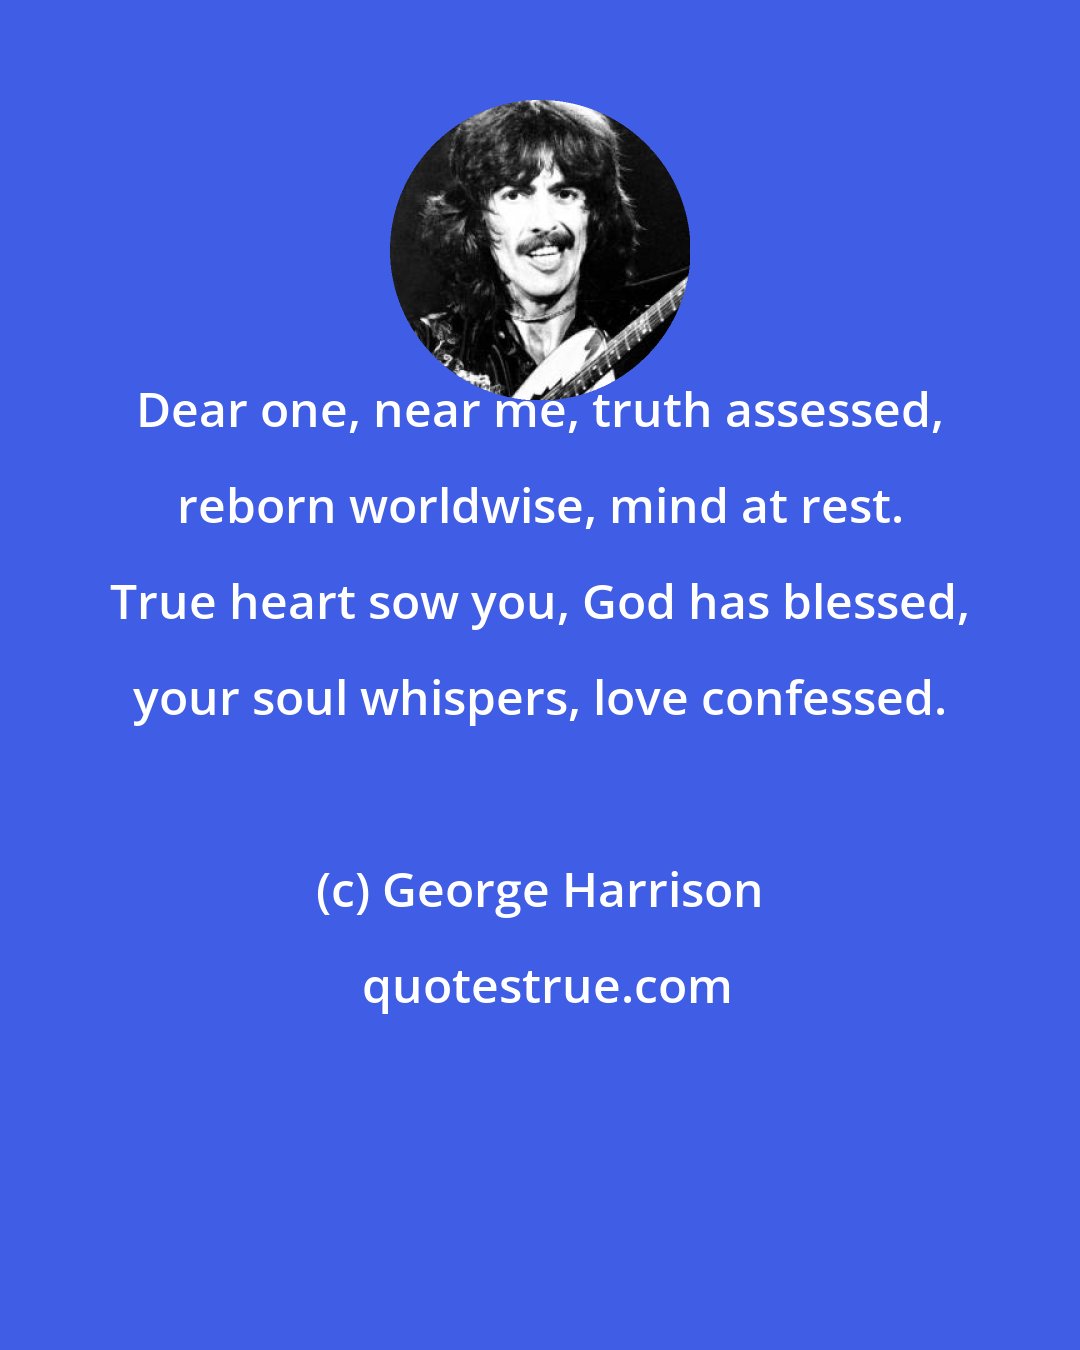 George Harrison: Dear one, near me, truth assessed, reborn worldwise, mind at rest. True heart sow you, God has blessed, your soul whispers, love confessed.